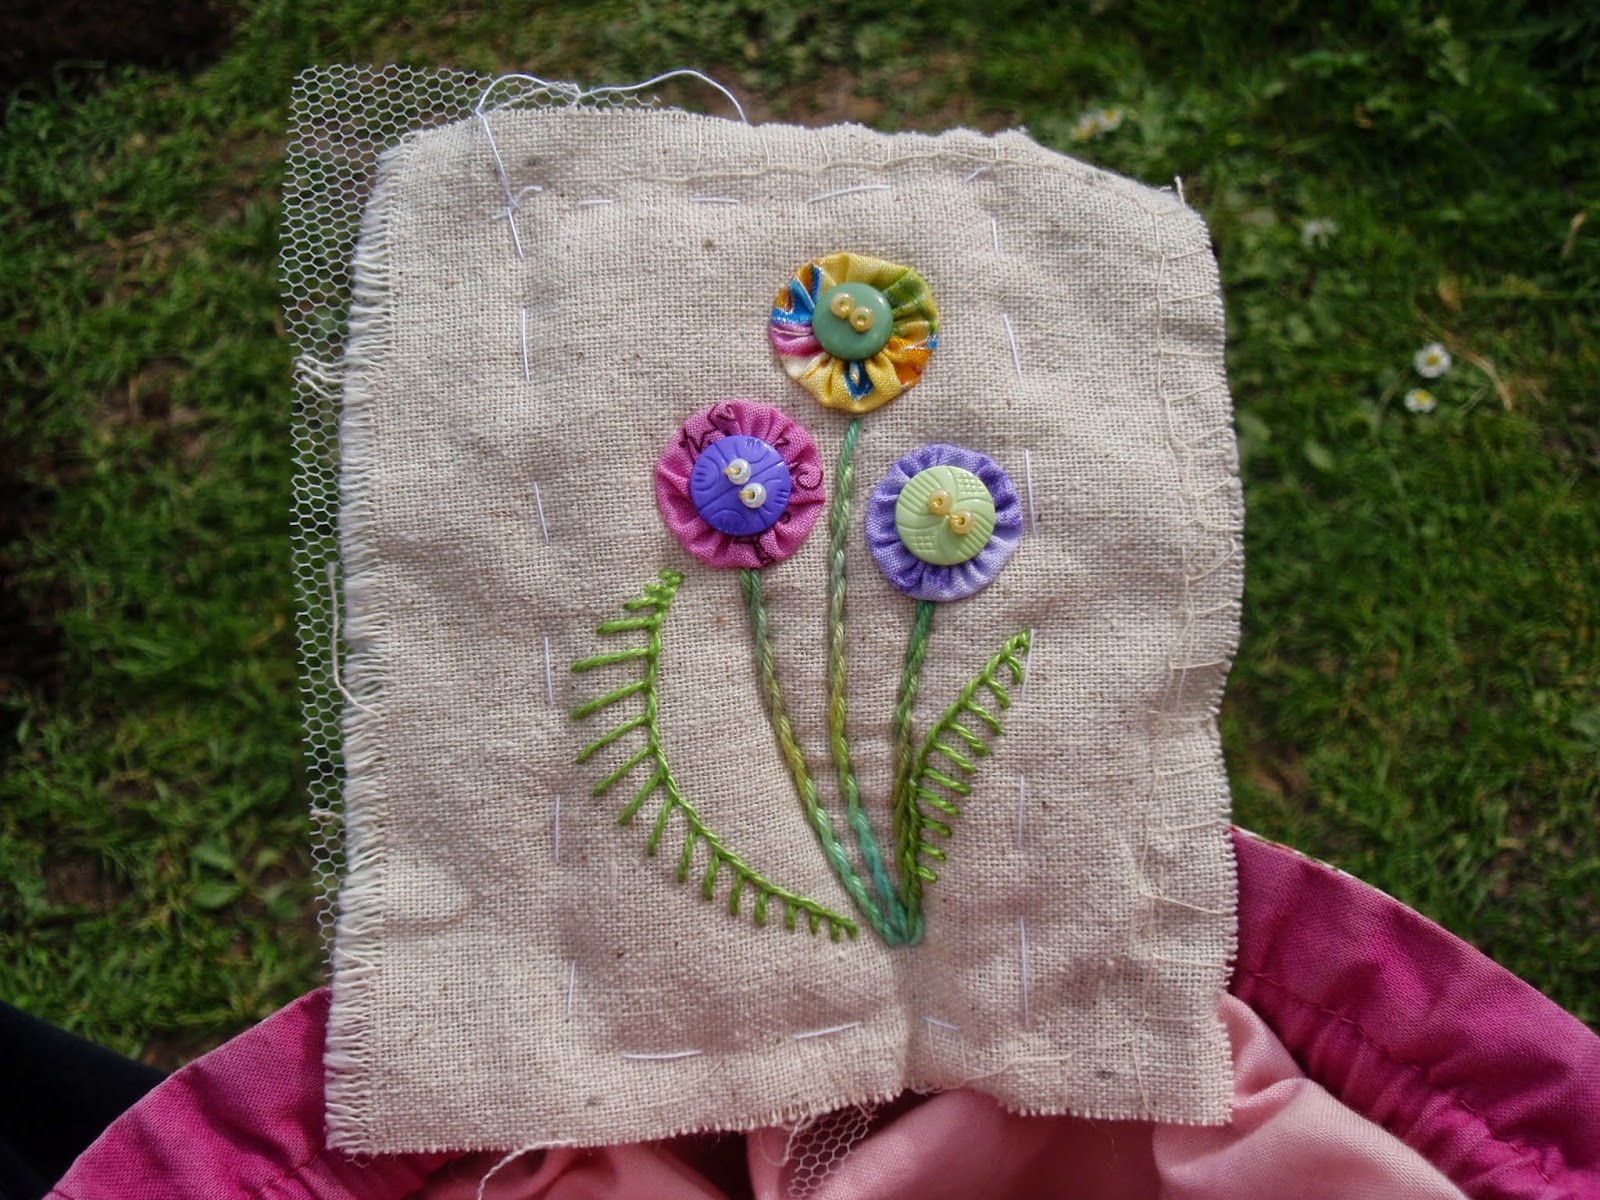 Embroidery finished, frame removed